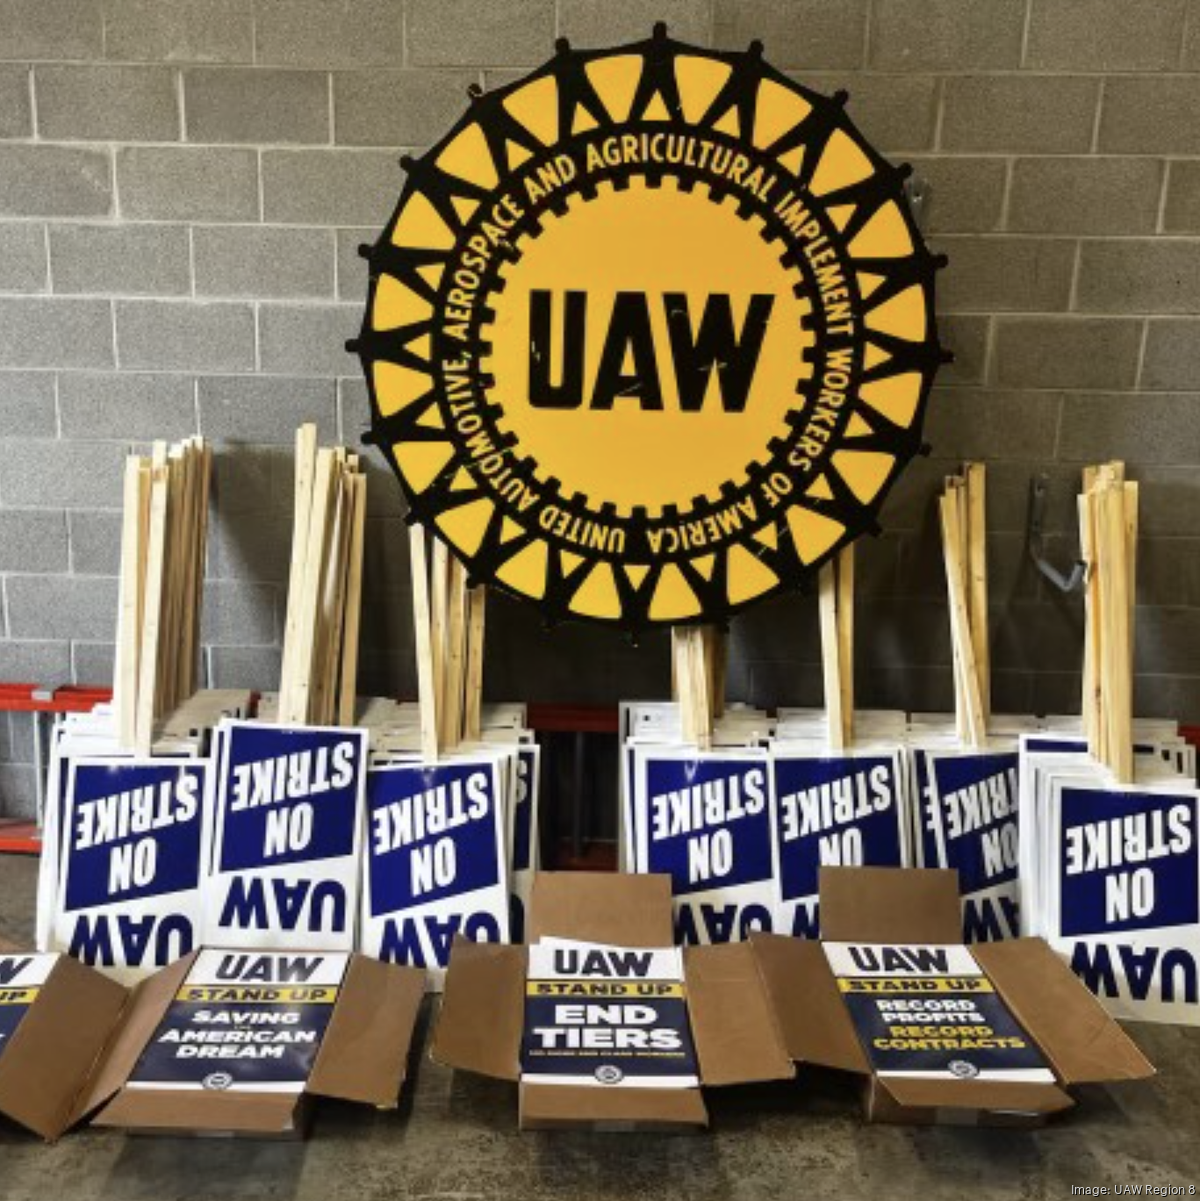 UAW Local 1700 Worker 2 Worker - WCM is an approach based on the